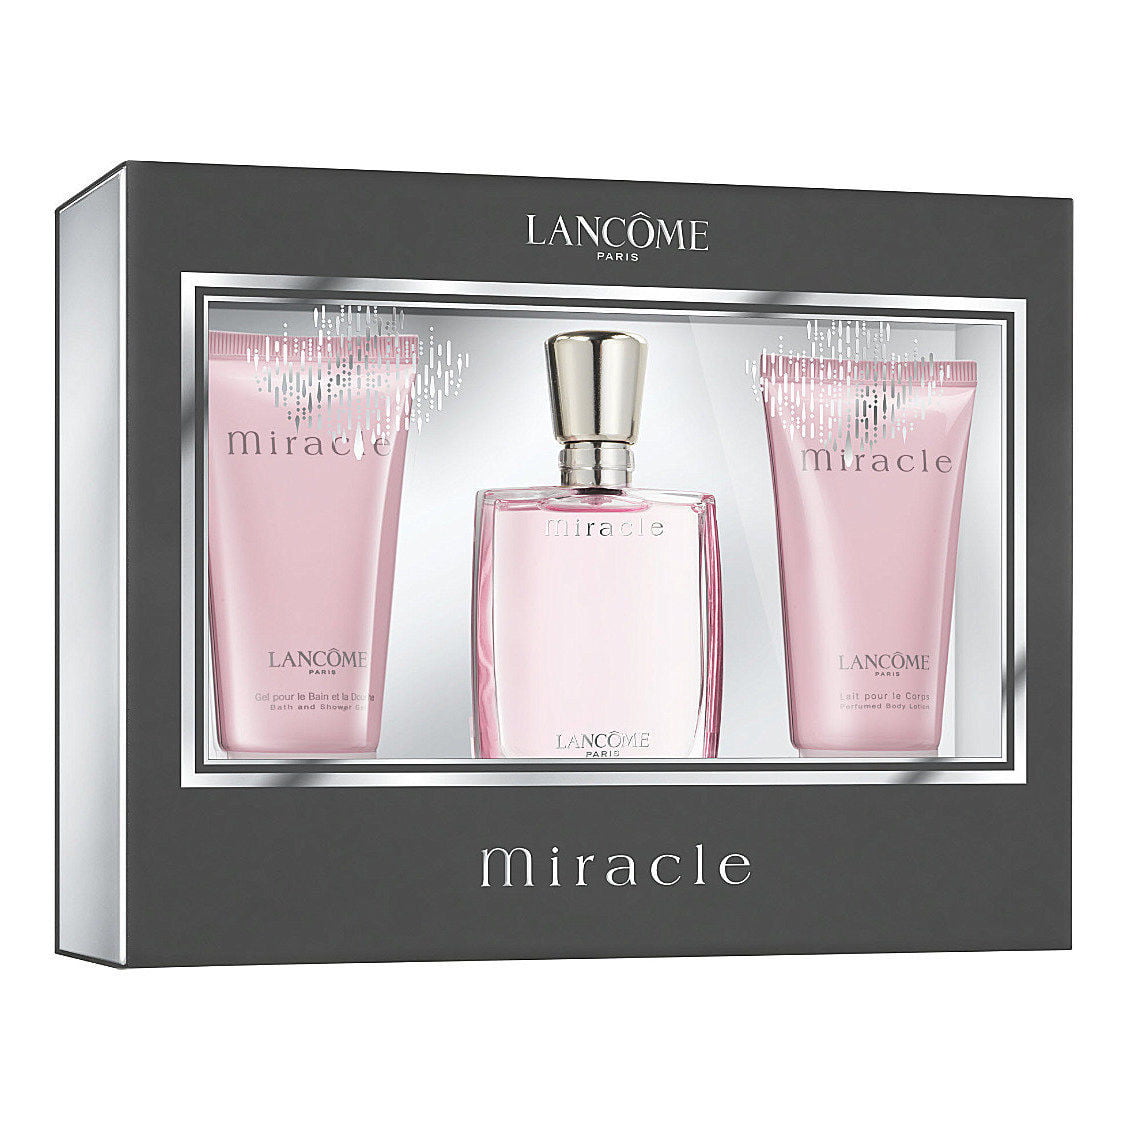 MIRACLE LANCOME 3 PCS SET: 1 EDP SP and 1.7 BODY LOTION and 1.7 SHOWER GEL -